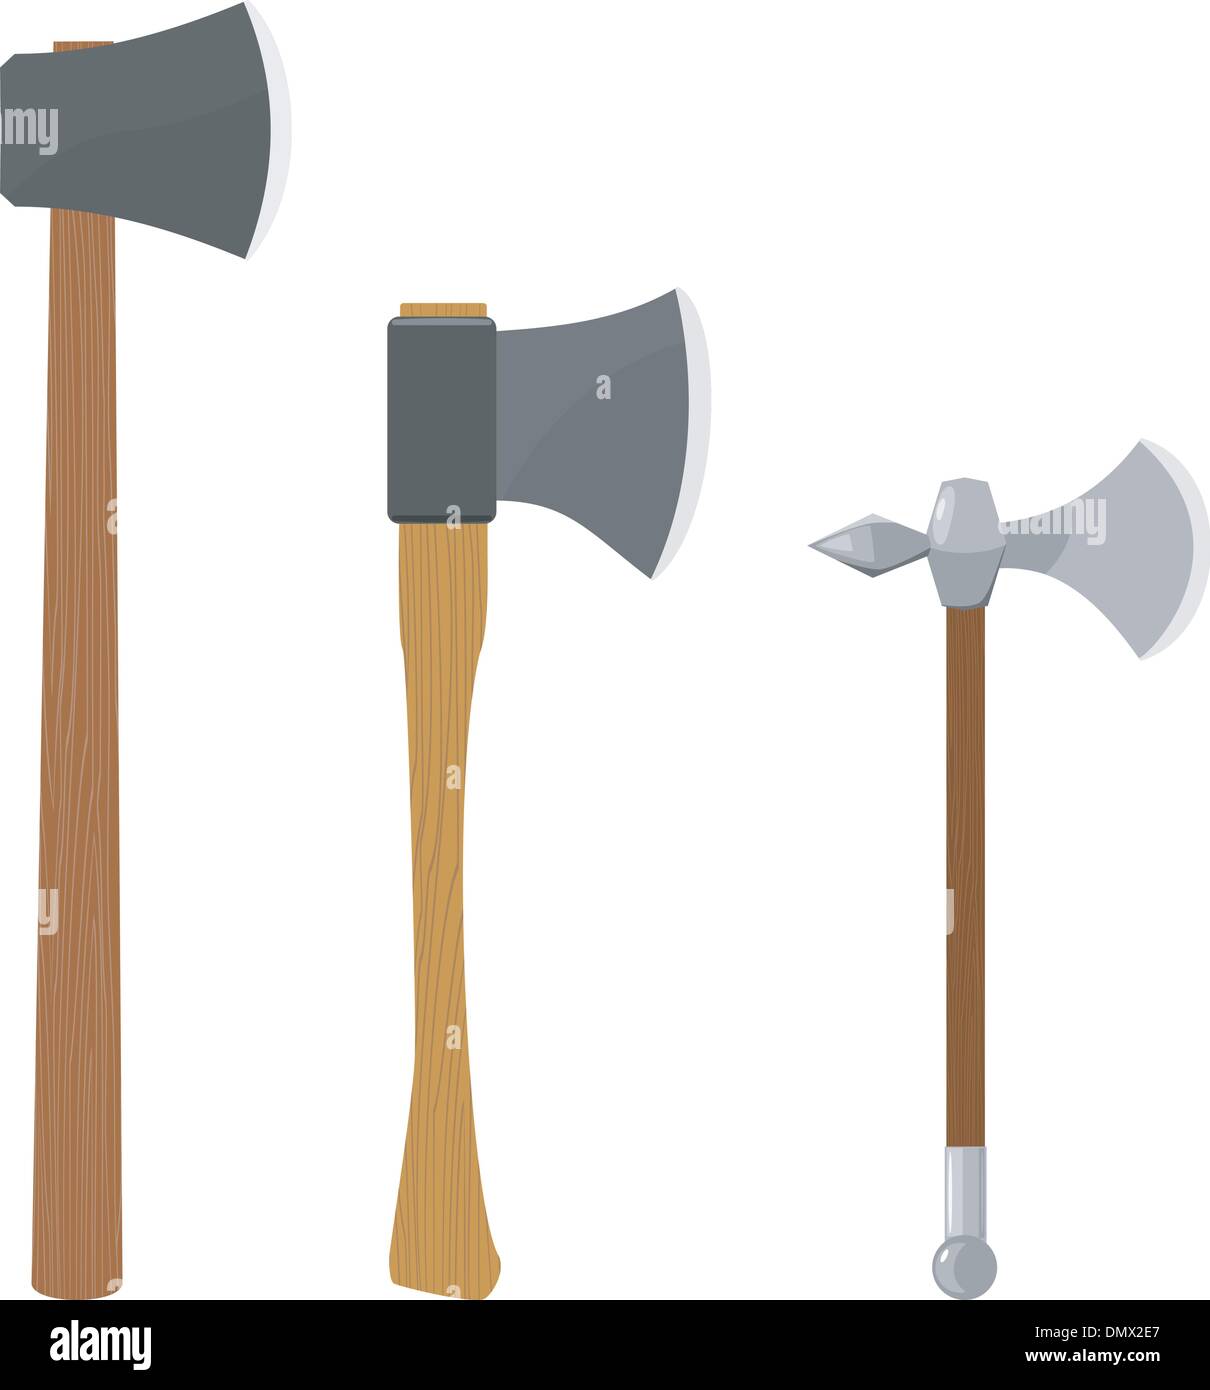 Set of vector illustrations of axes Stock Vector